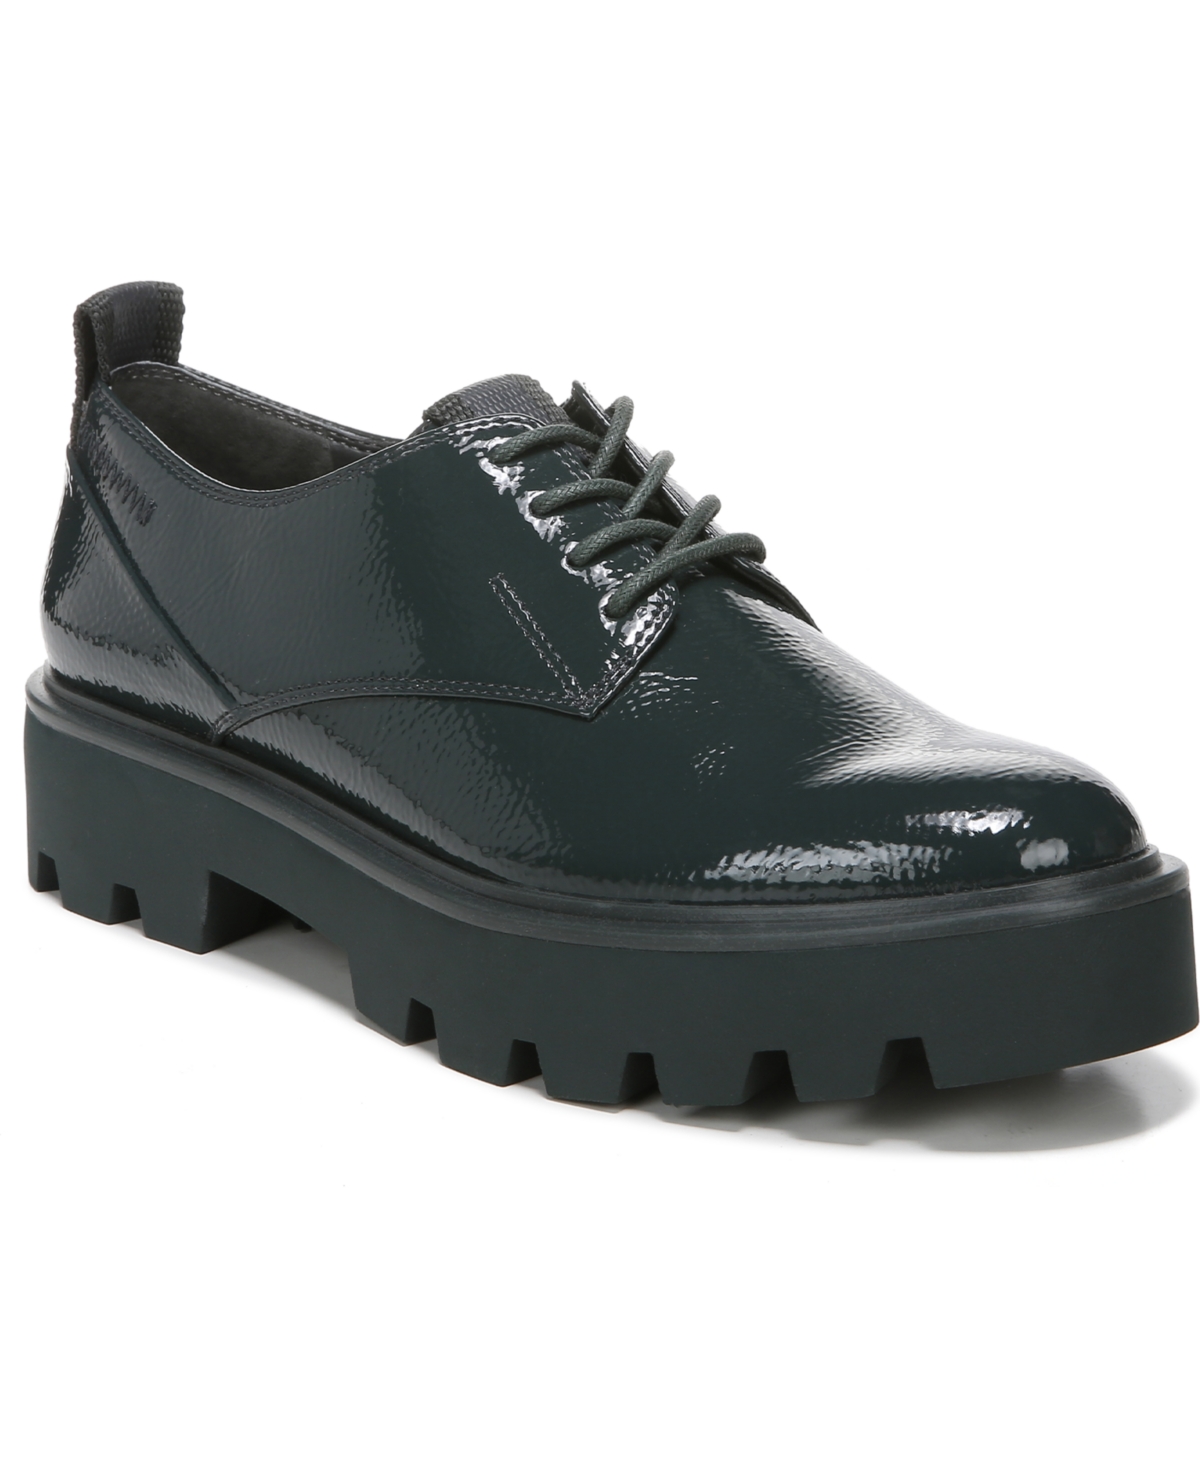 UPC 017138587518 product image for Franco Sarto Balin Laced Lug Sole Oxfords Women's Shoes | upcitemdb.com